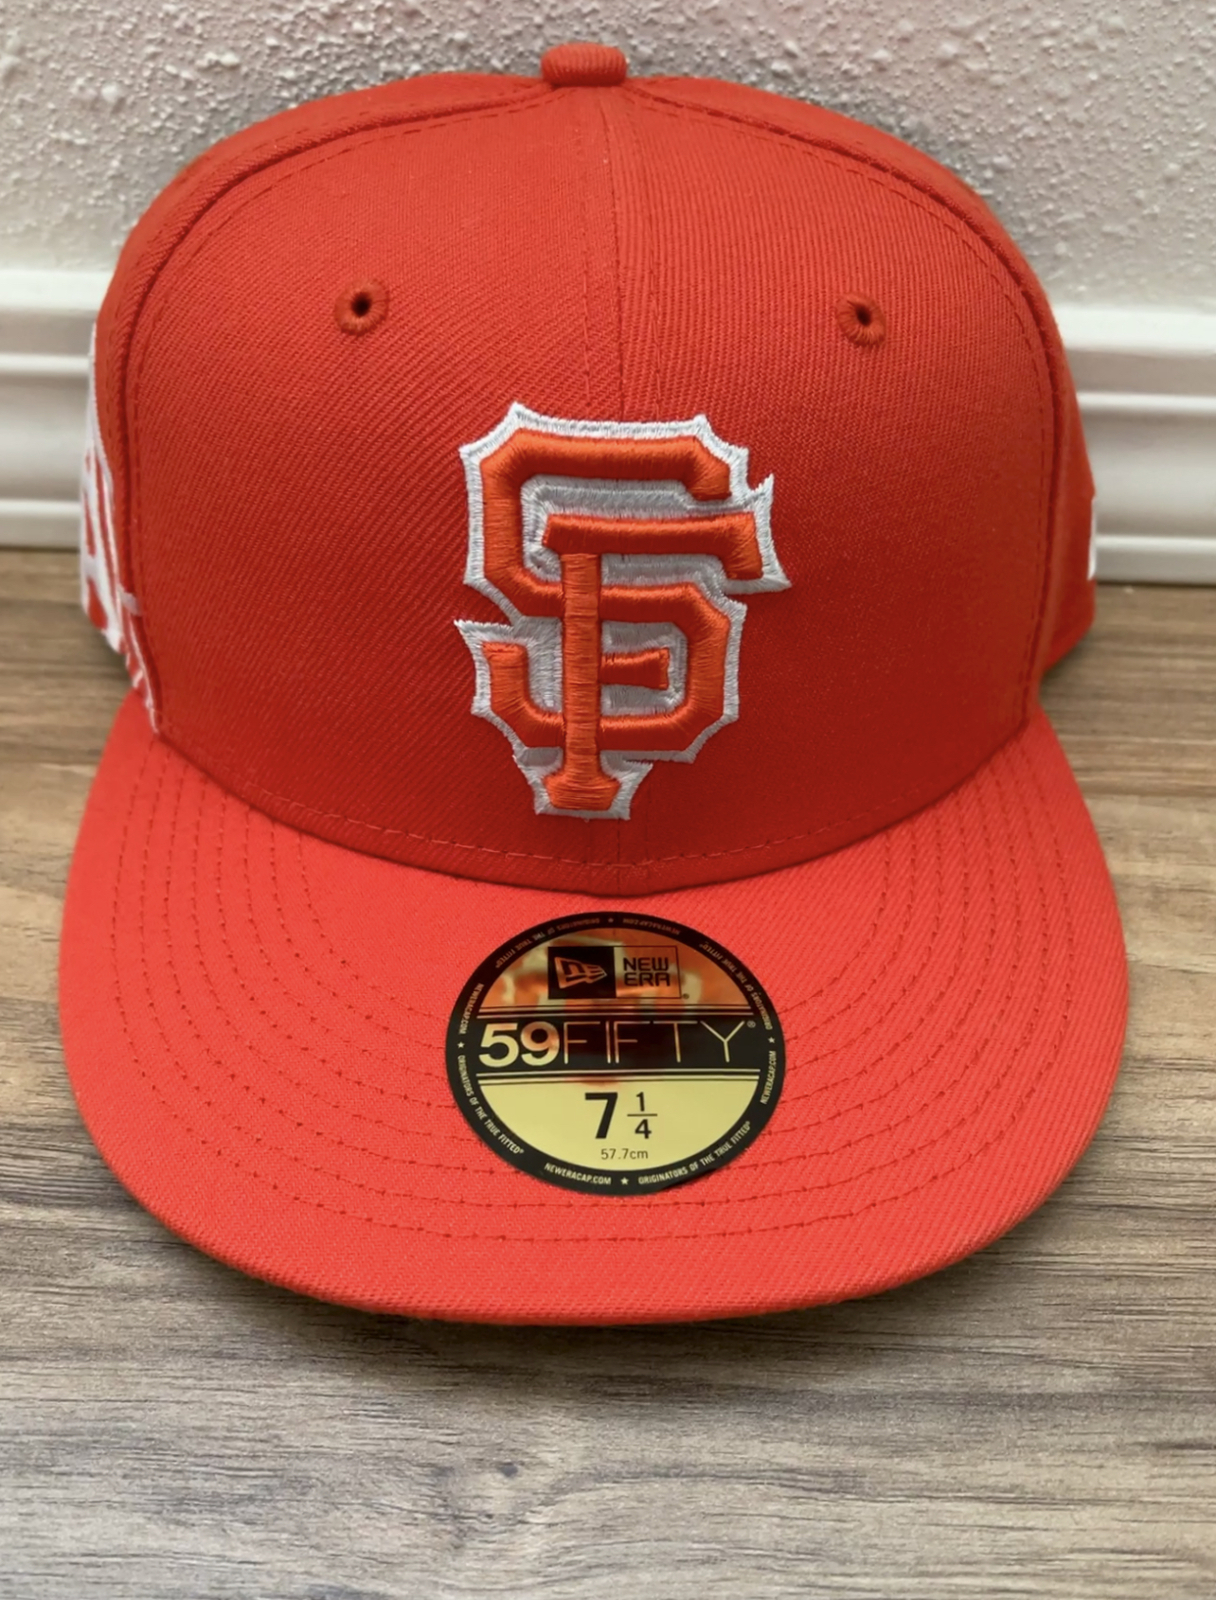 San Francisco Giants CITY CONNECT Fitted 59Fifty Hat 7 1/4 SOLD OUT